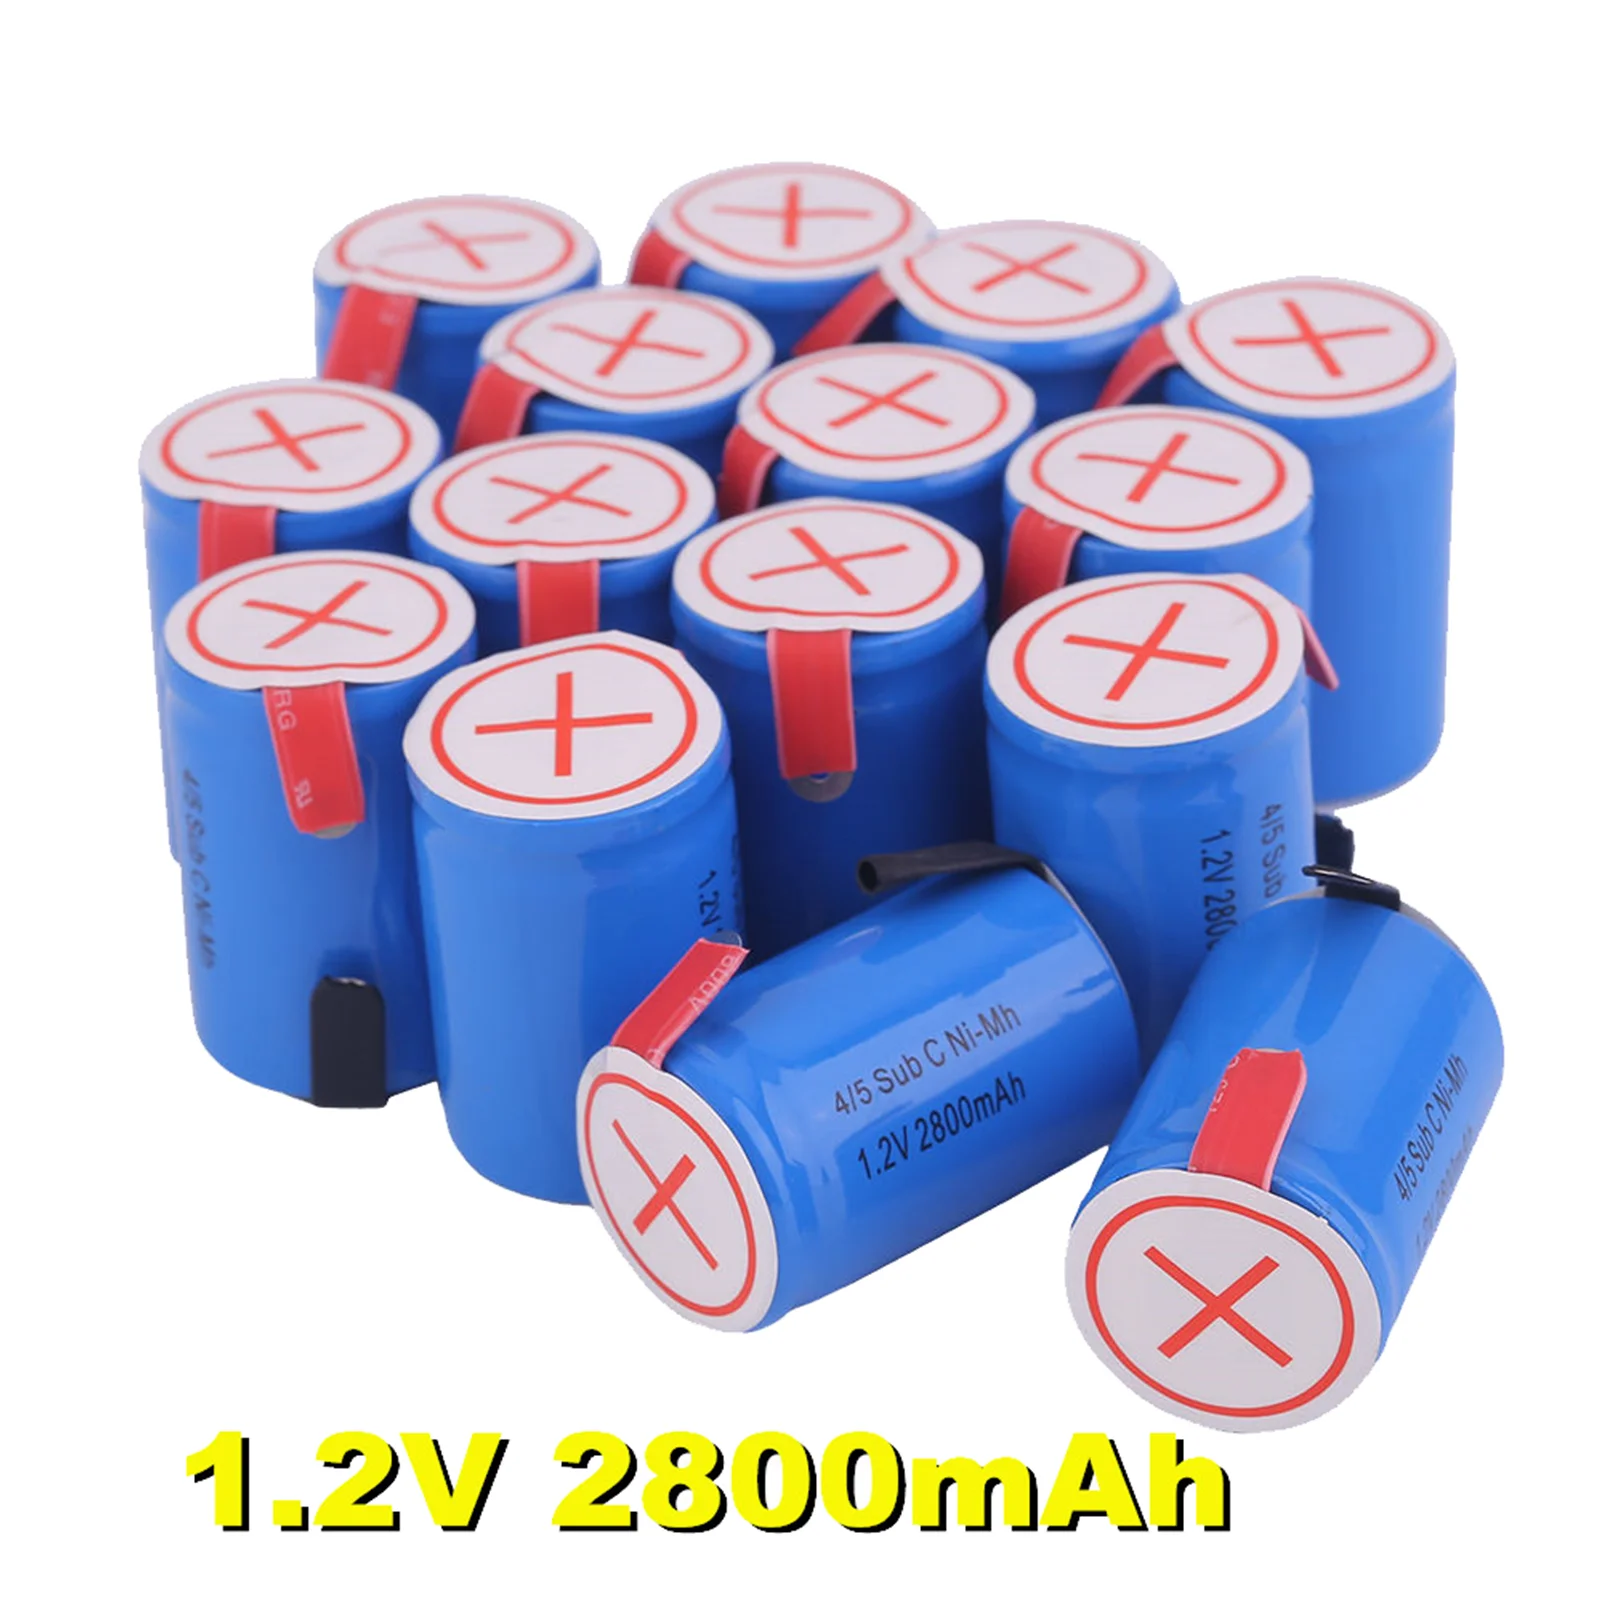 New 4/5 SC Sub C li-ion Li-Po Lithium Battery high-discharge 1.2V 2800mAh Rechargeable Ni-MH Batteries With Welding Tabs